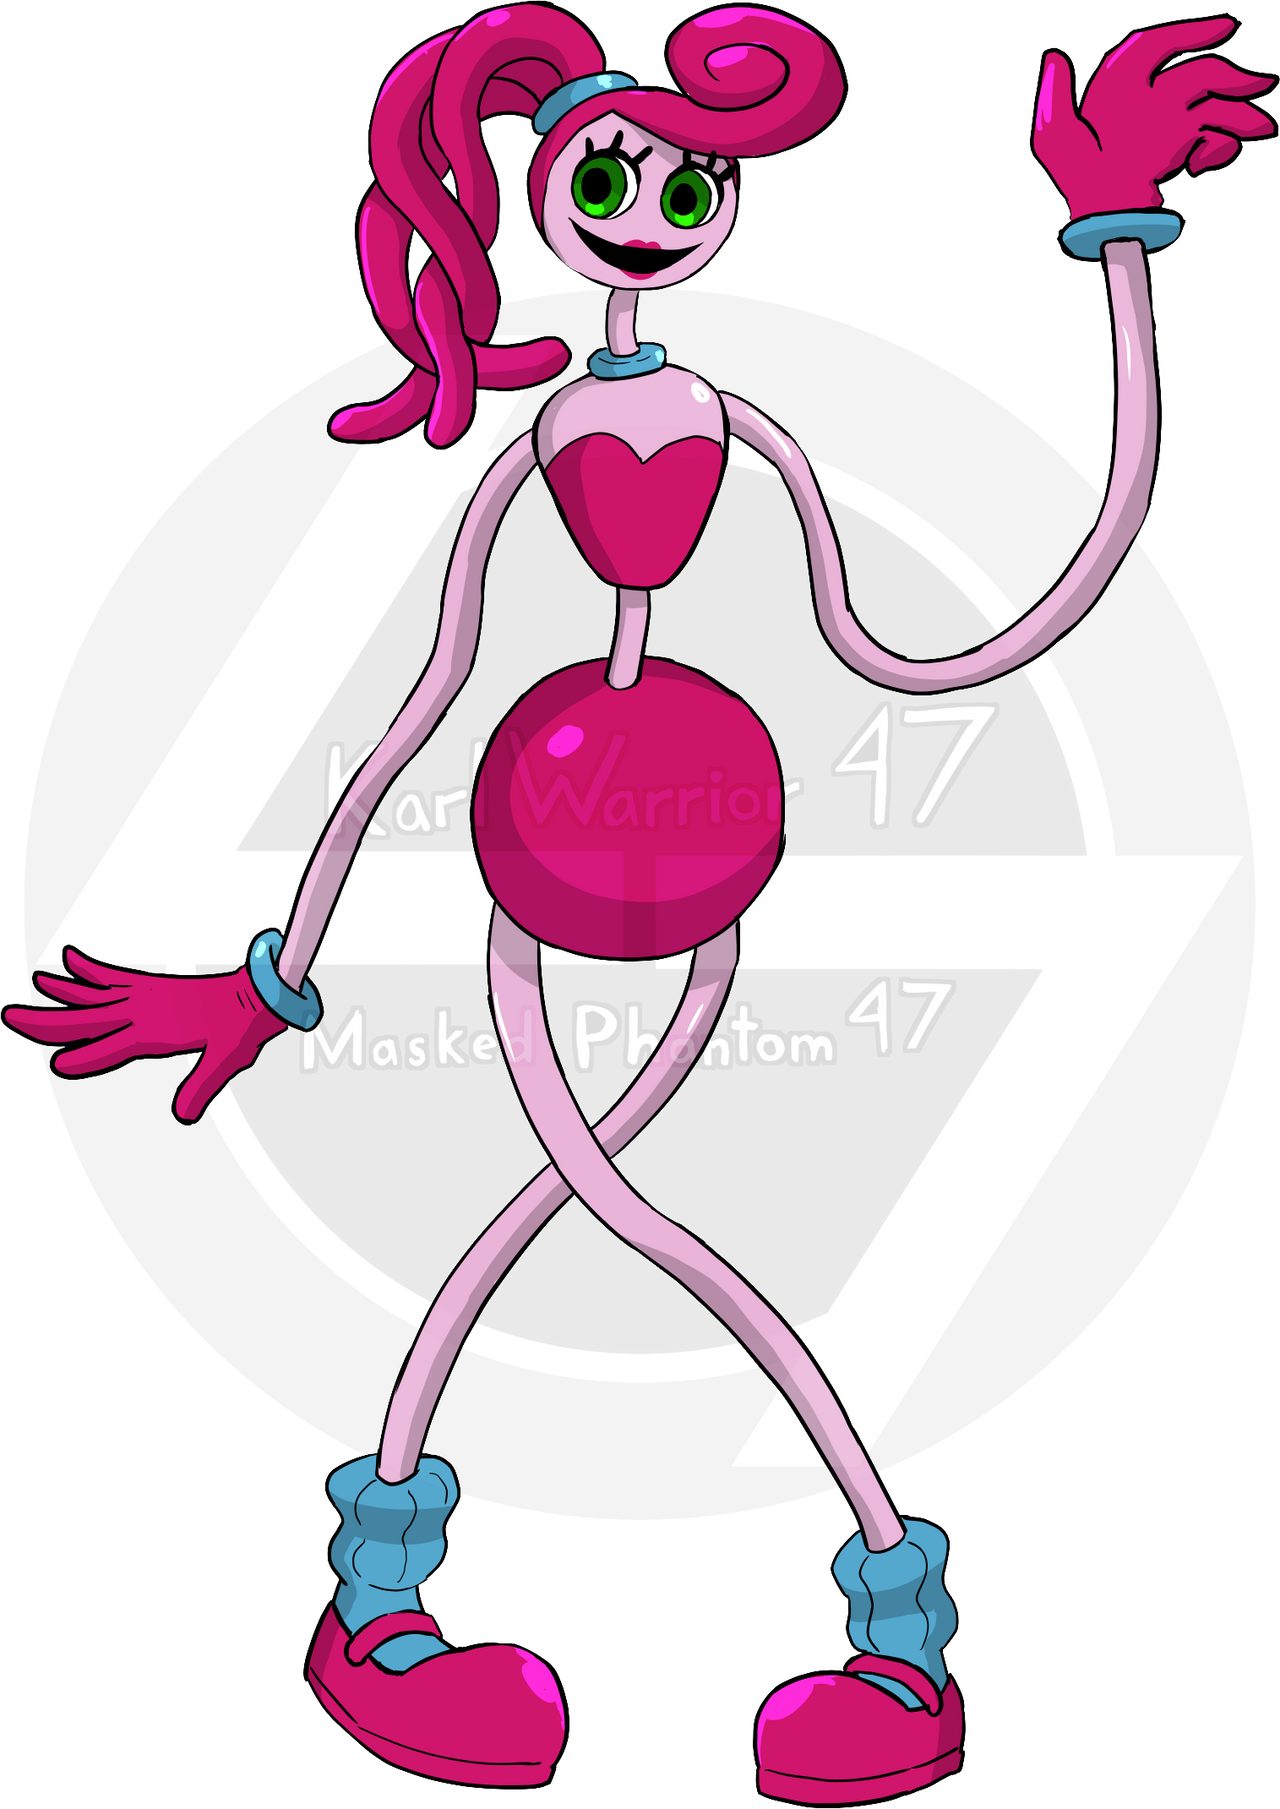 Mommy LongLegs png by Coenisawesome on DeviantArt